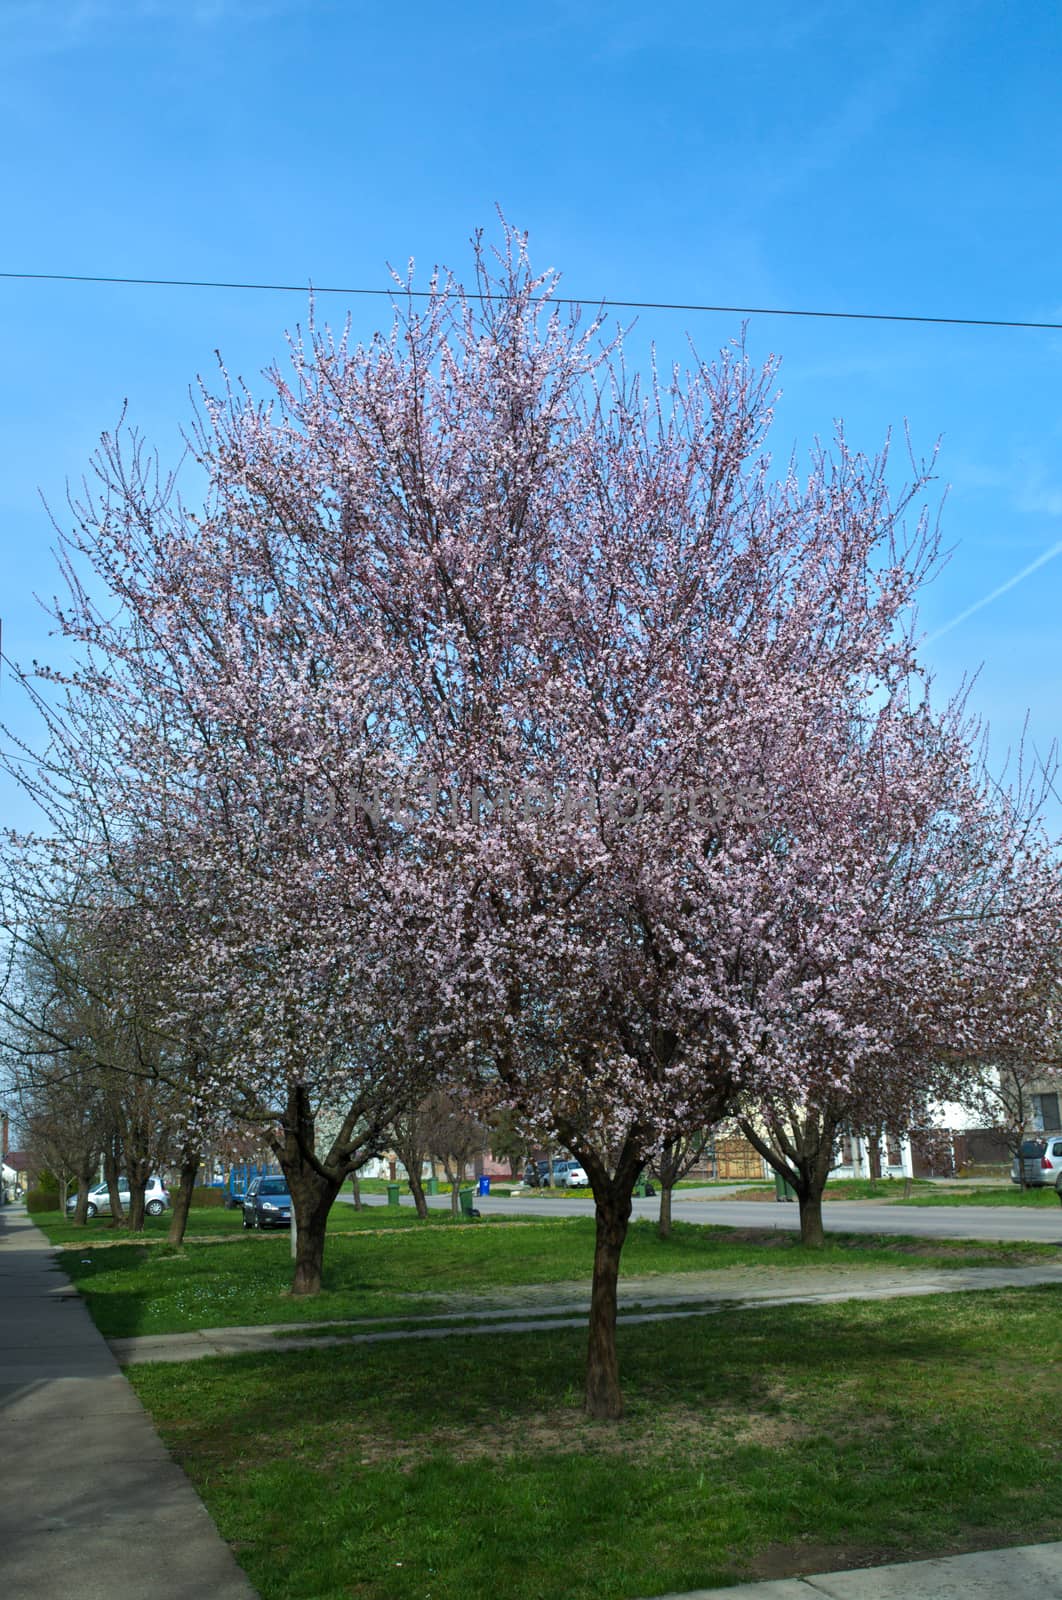 Flowering apricot trees at sprig time